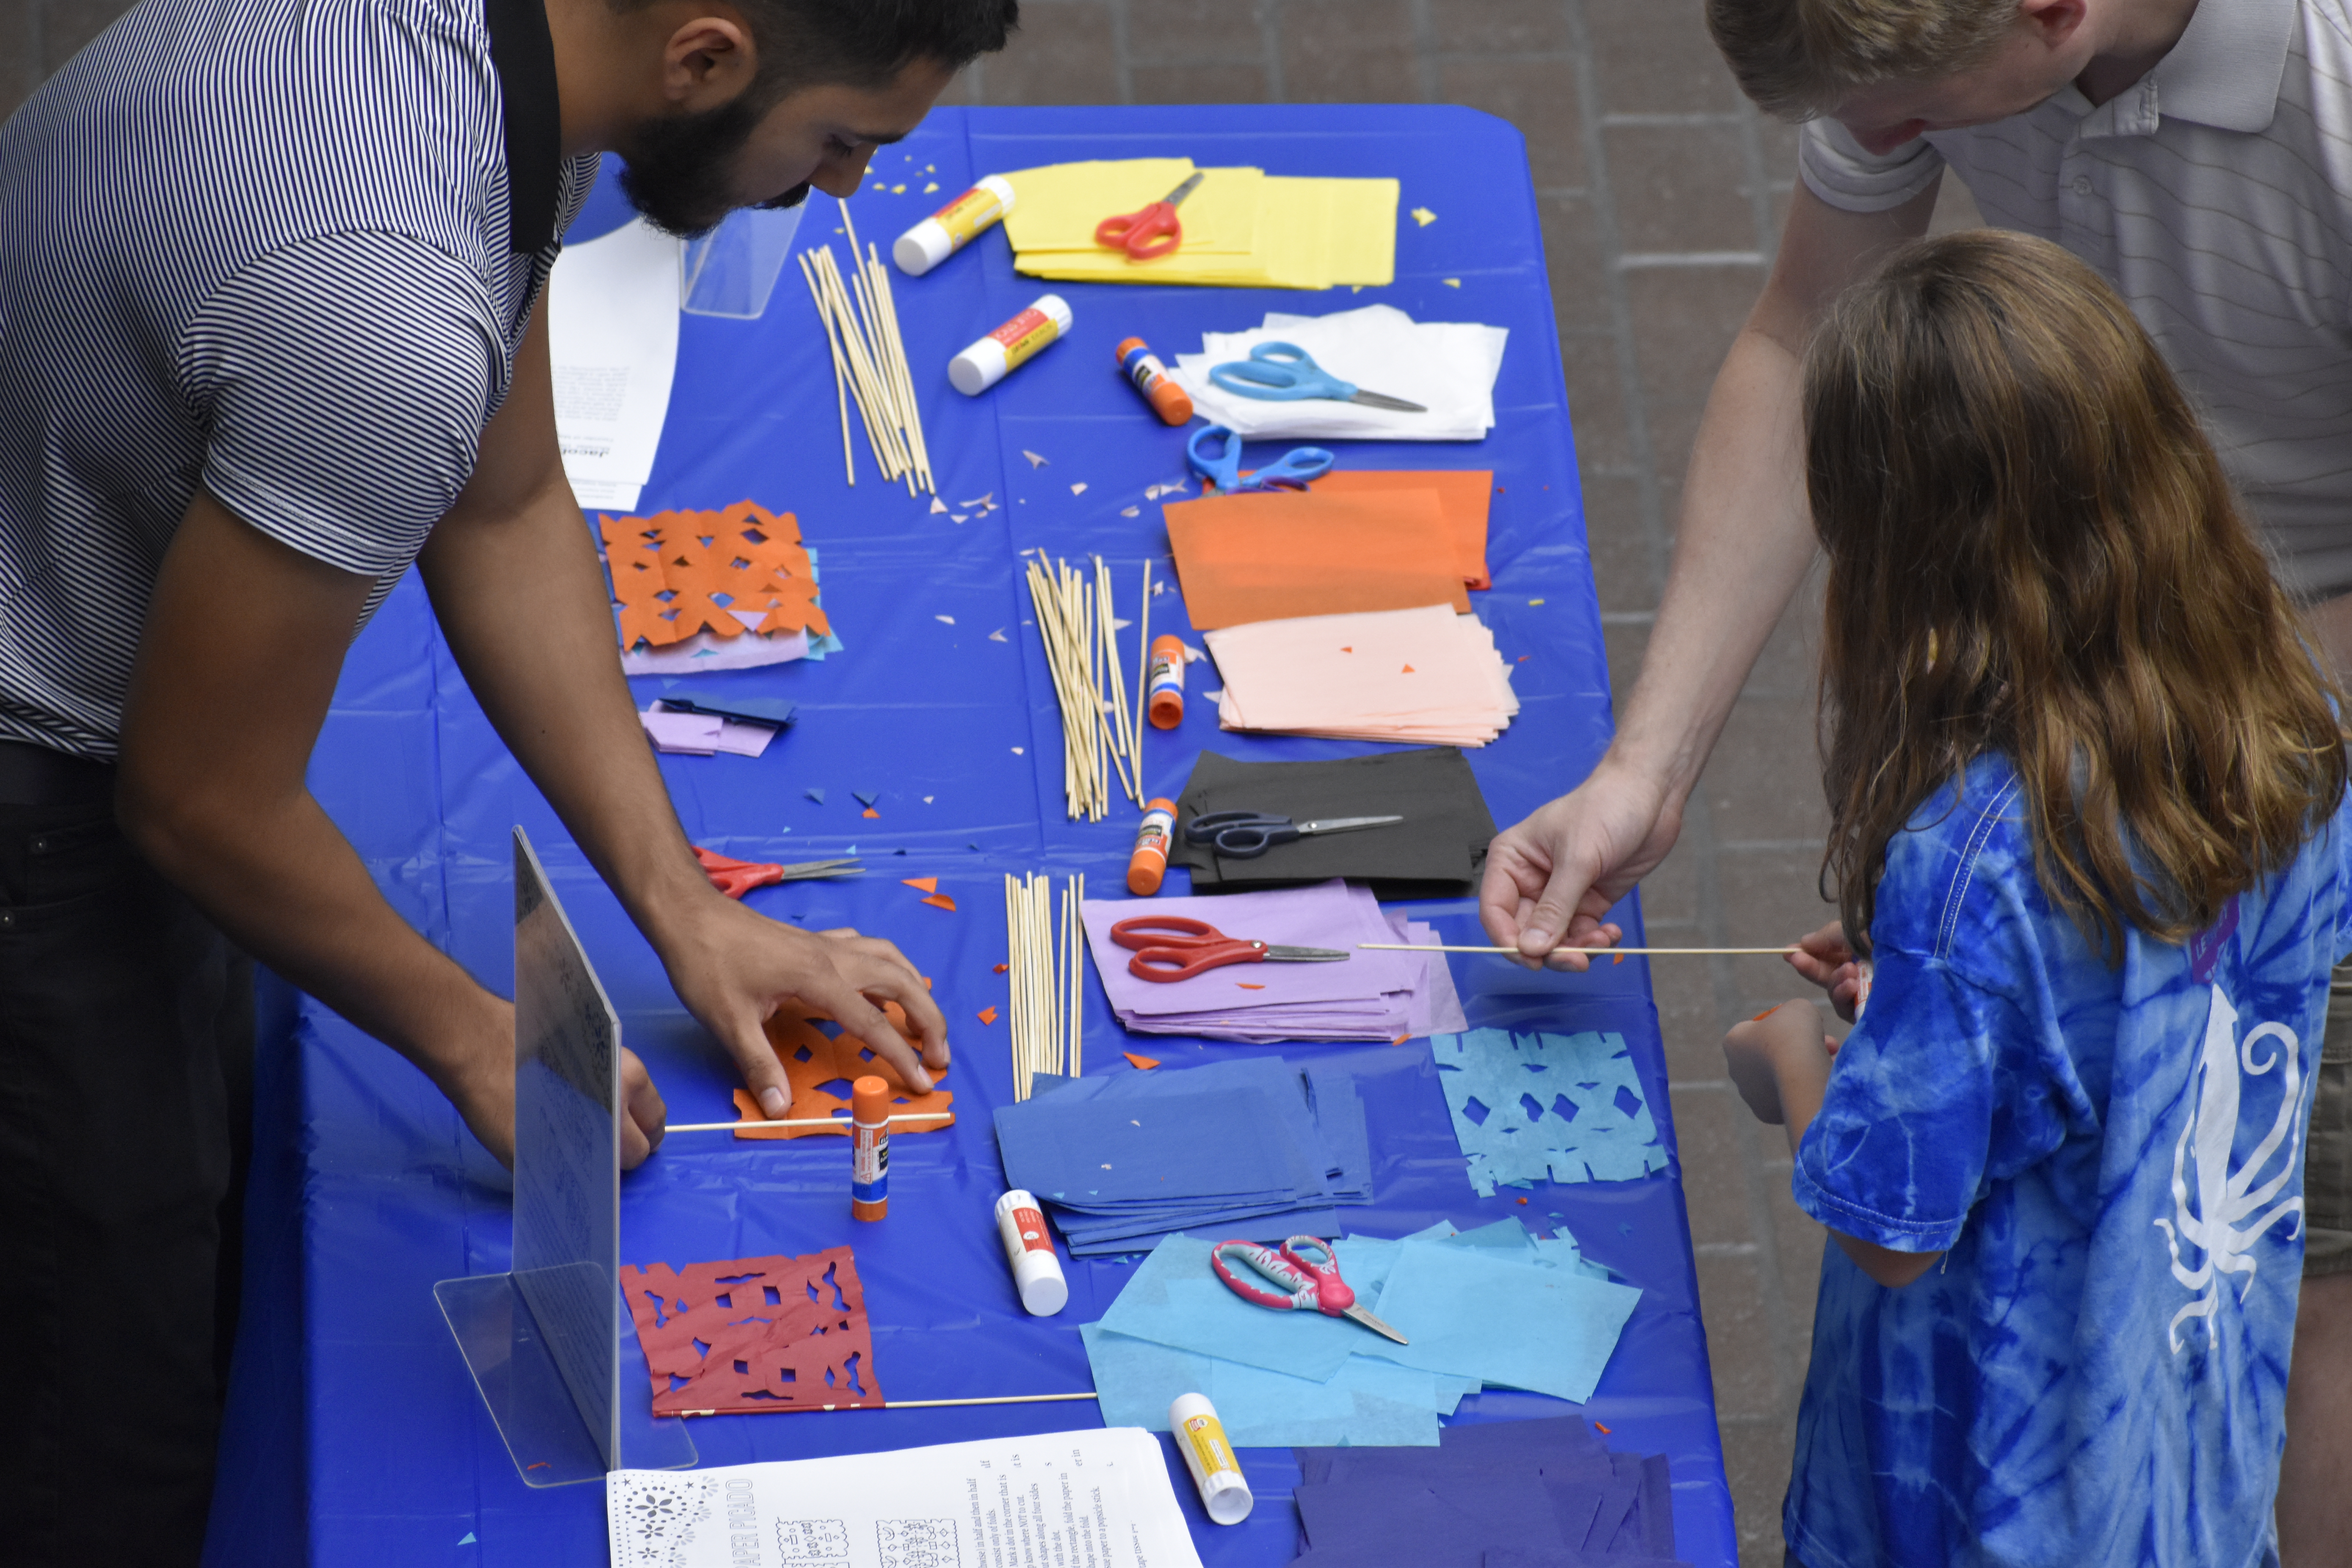 A father and child being taught how to make Papel picado (chopped paper banners).